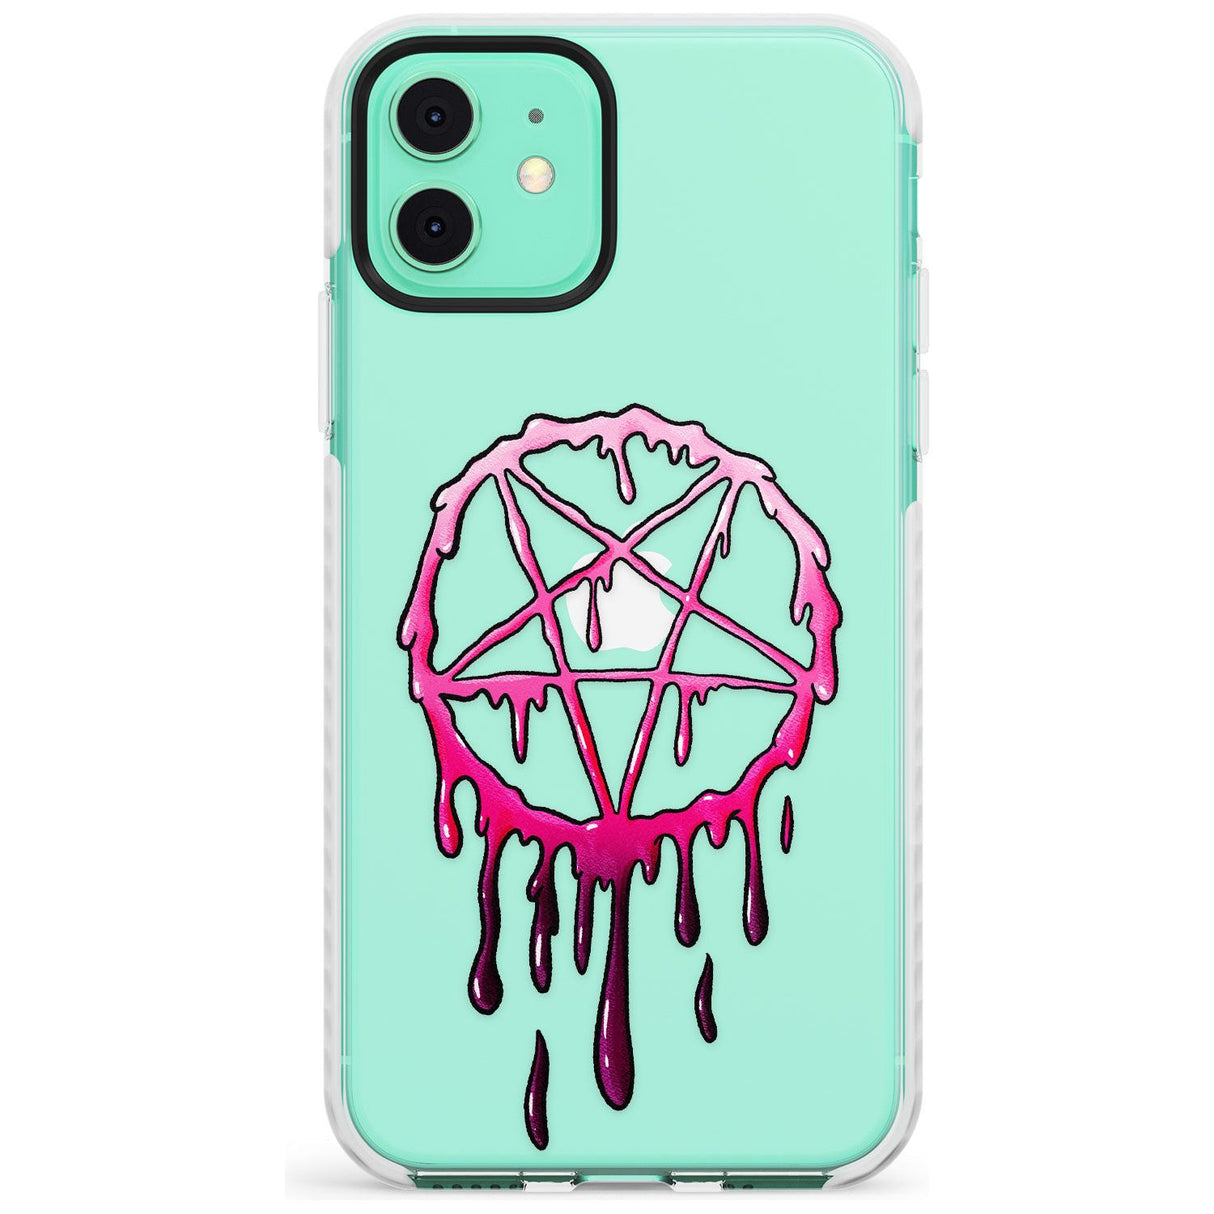 Pentagram of Blood Impact Phone Case for iPhone 11